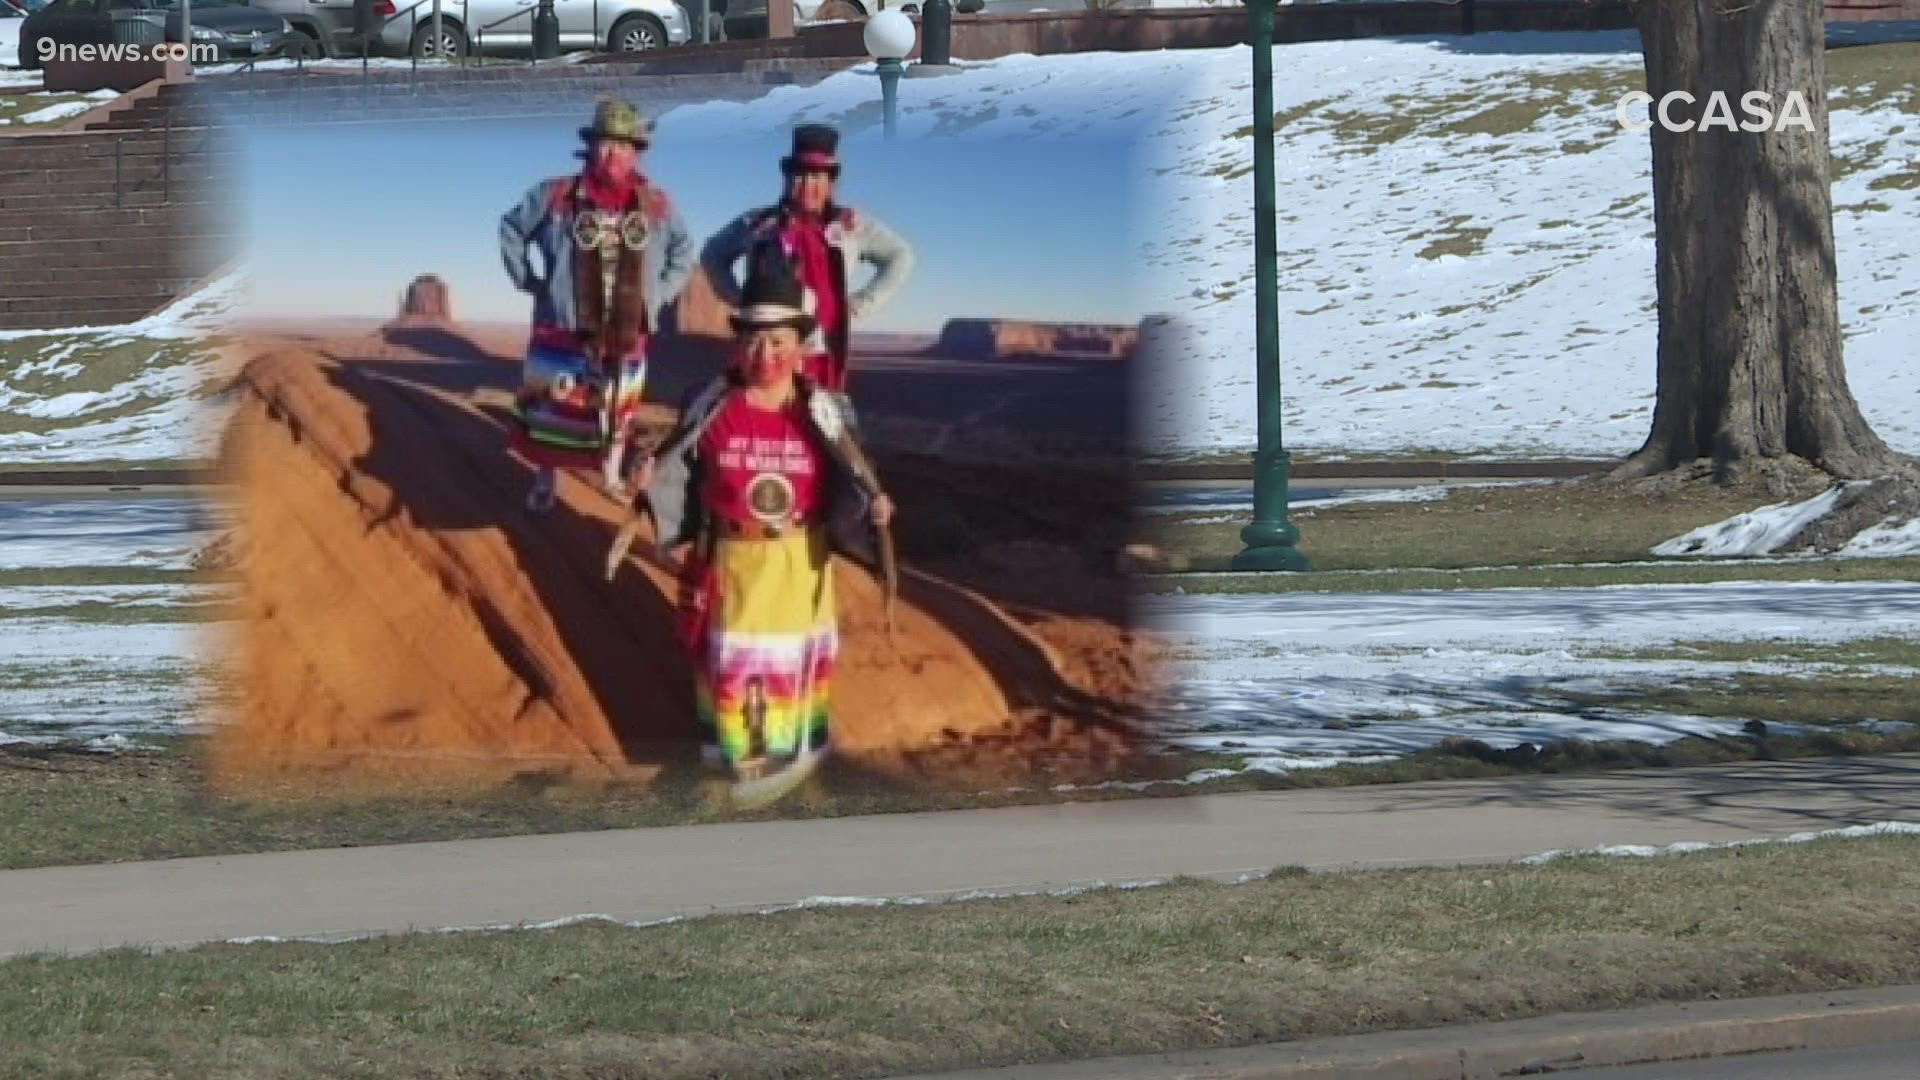 A bill introduced Tuesday would create a specific office dedicated to responding to cases of missing and murdered Indigenous people in Colorado.